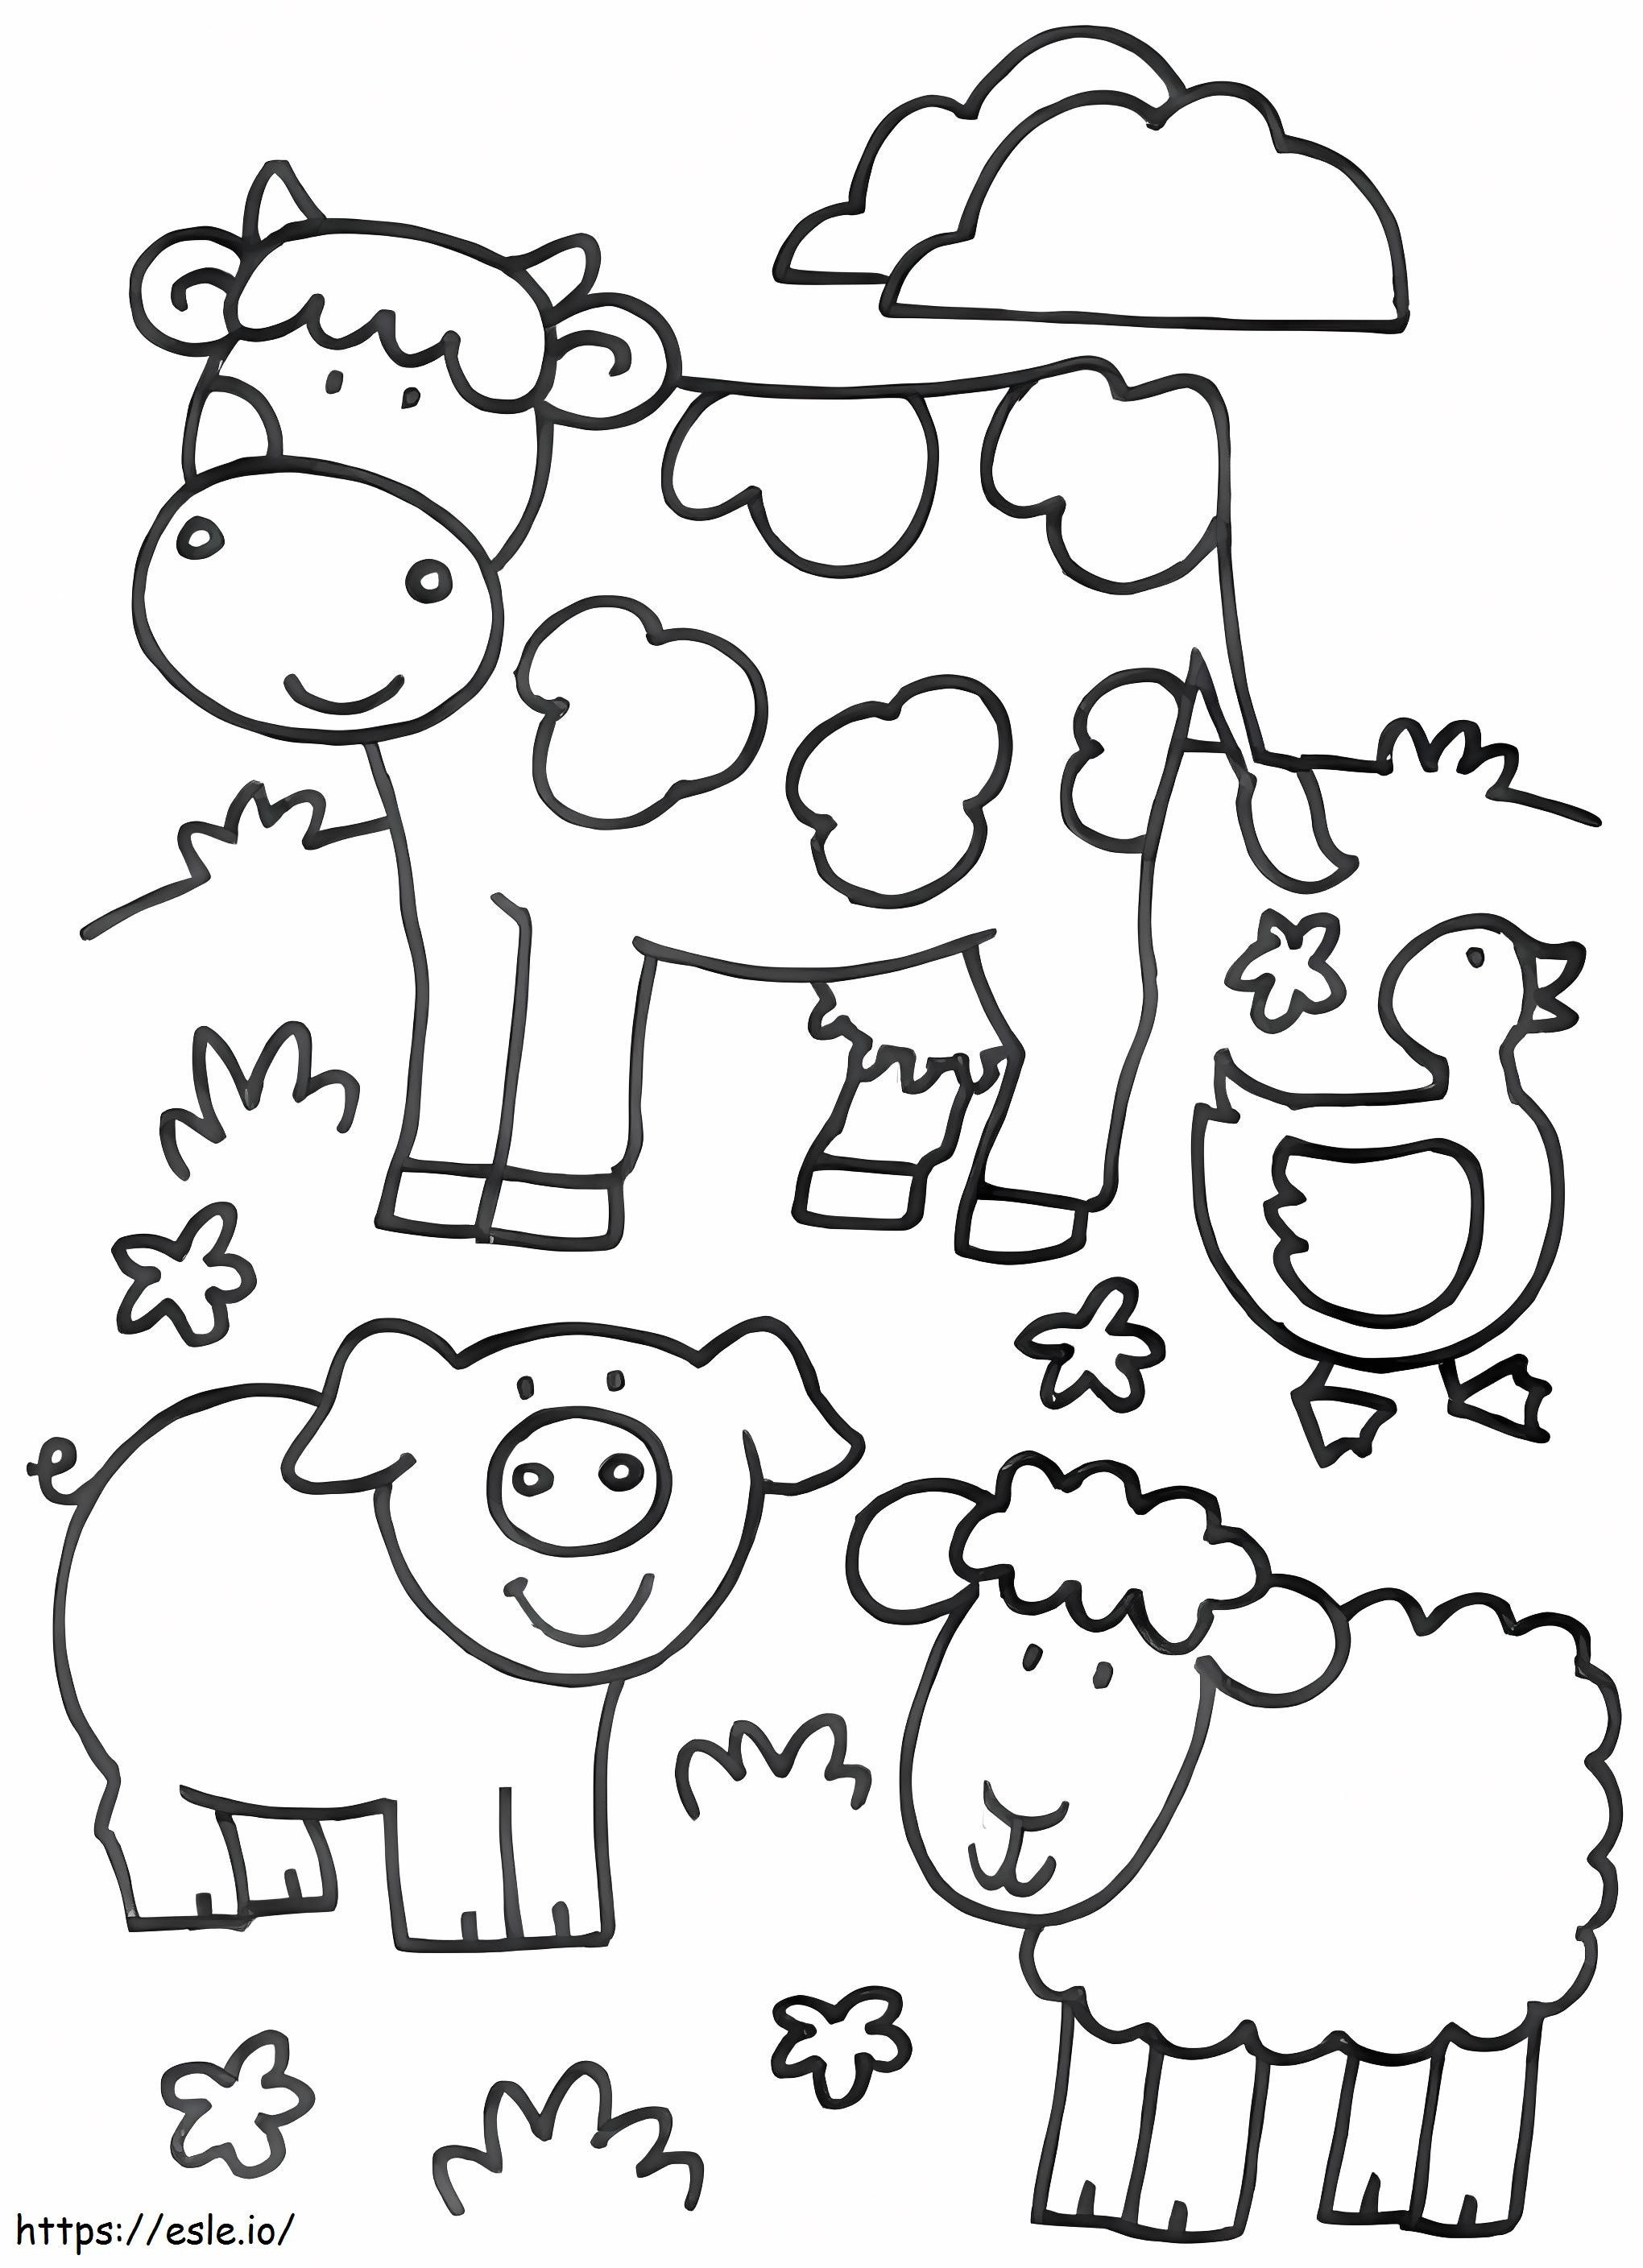 Animal Farm Drawing coloring page